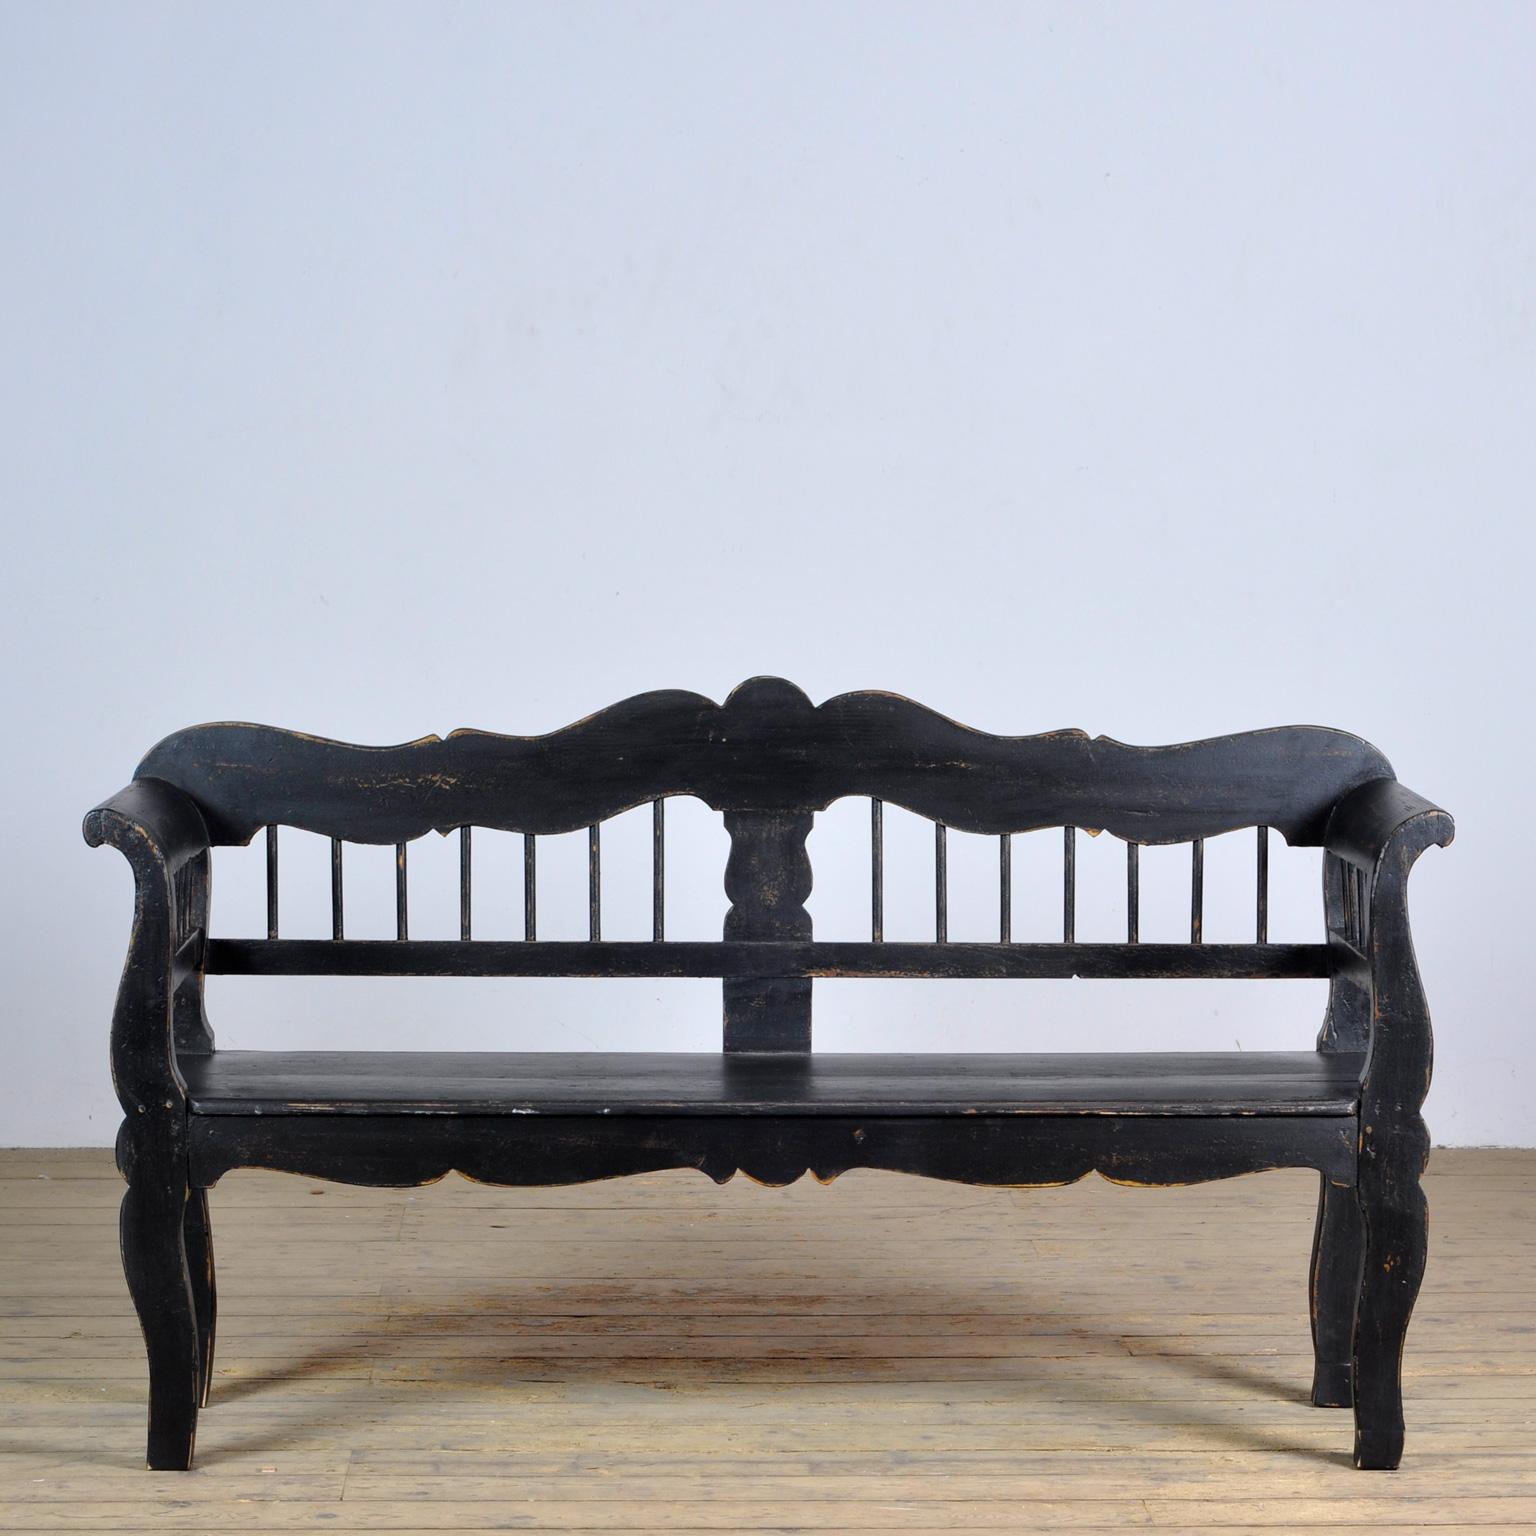 A charming bench from hungary with the original paint. Over time and use, the black paint has been worn away in places to the wood. The bench is stable and sturdy. Free of woodworm.